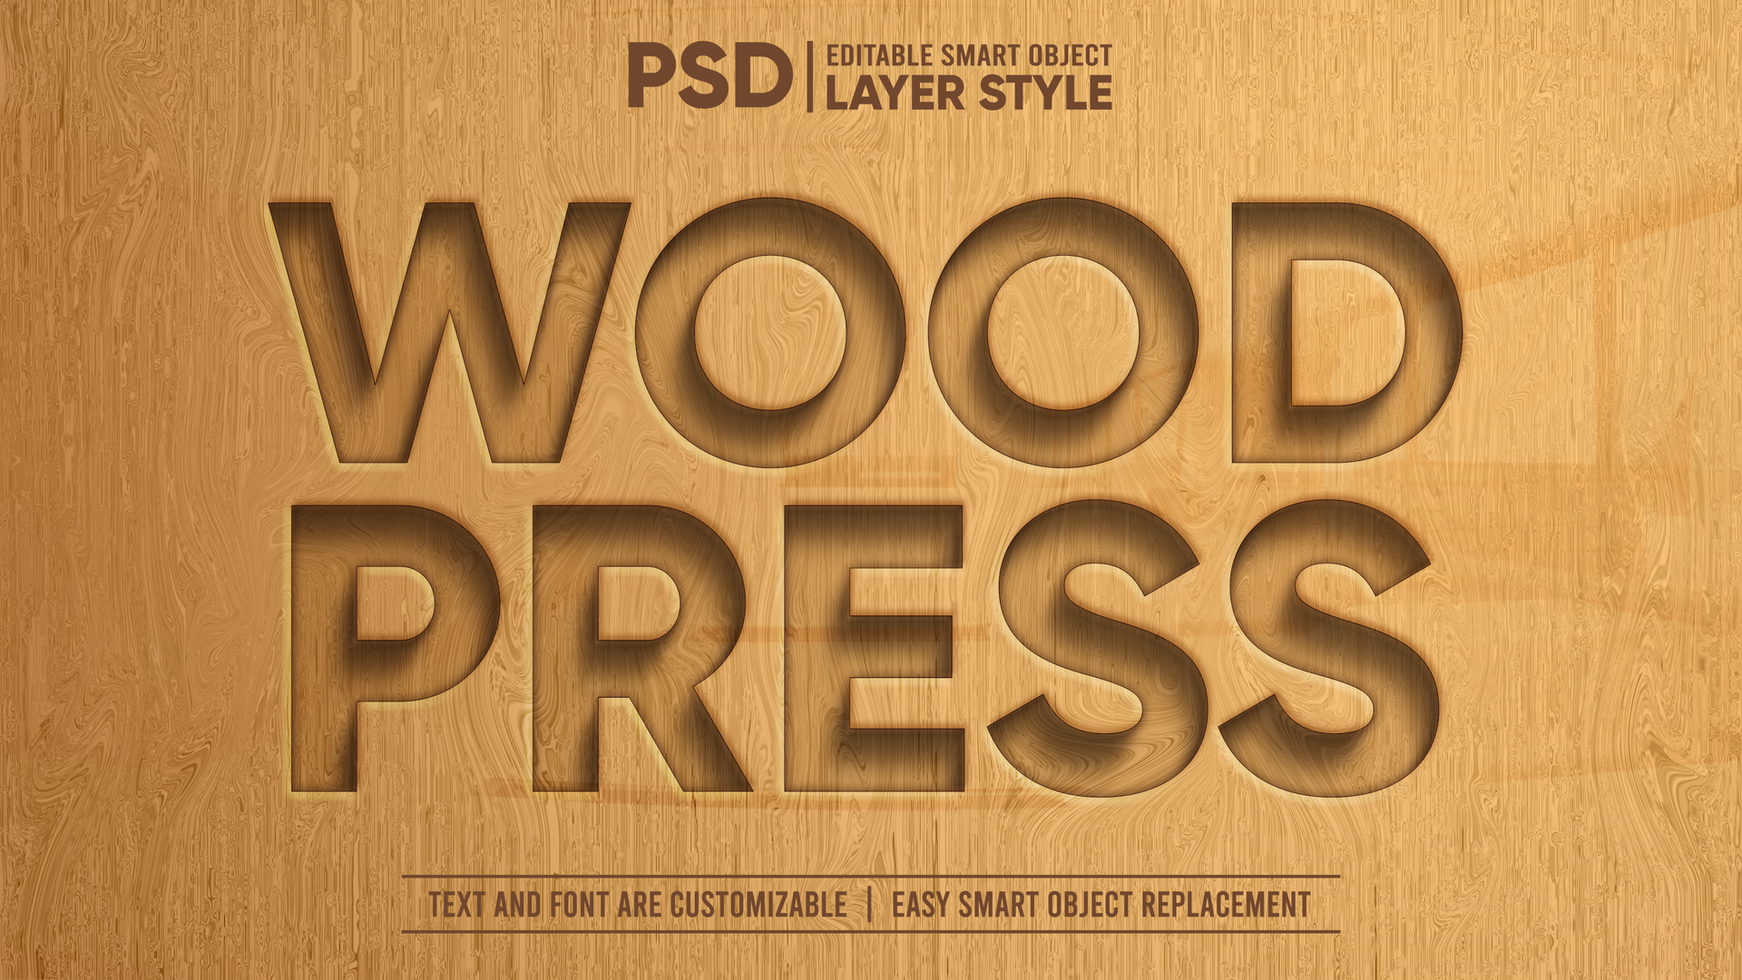 Wooden Press Carved Realistic 3D Editable Smart Object Text Effect psd